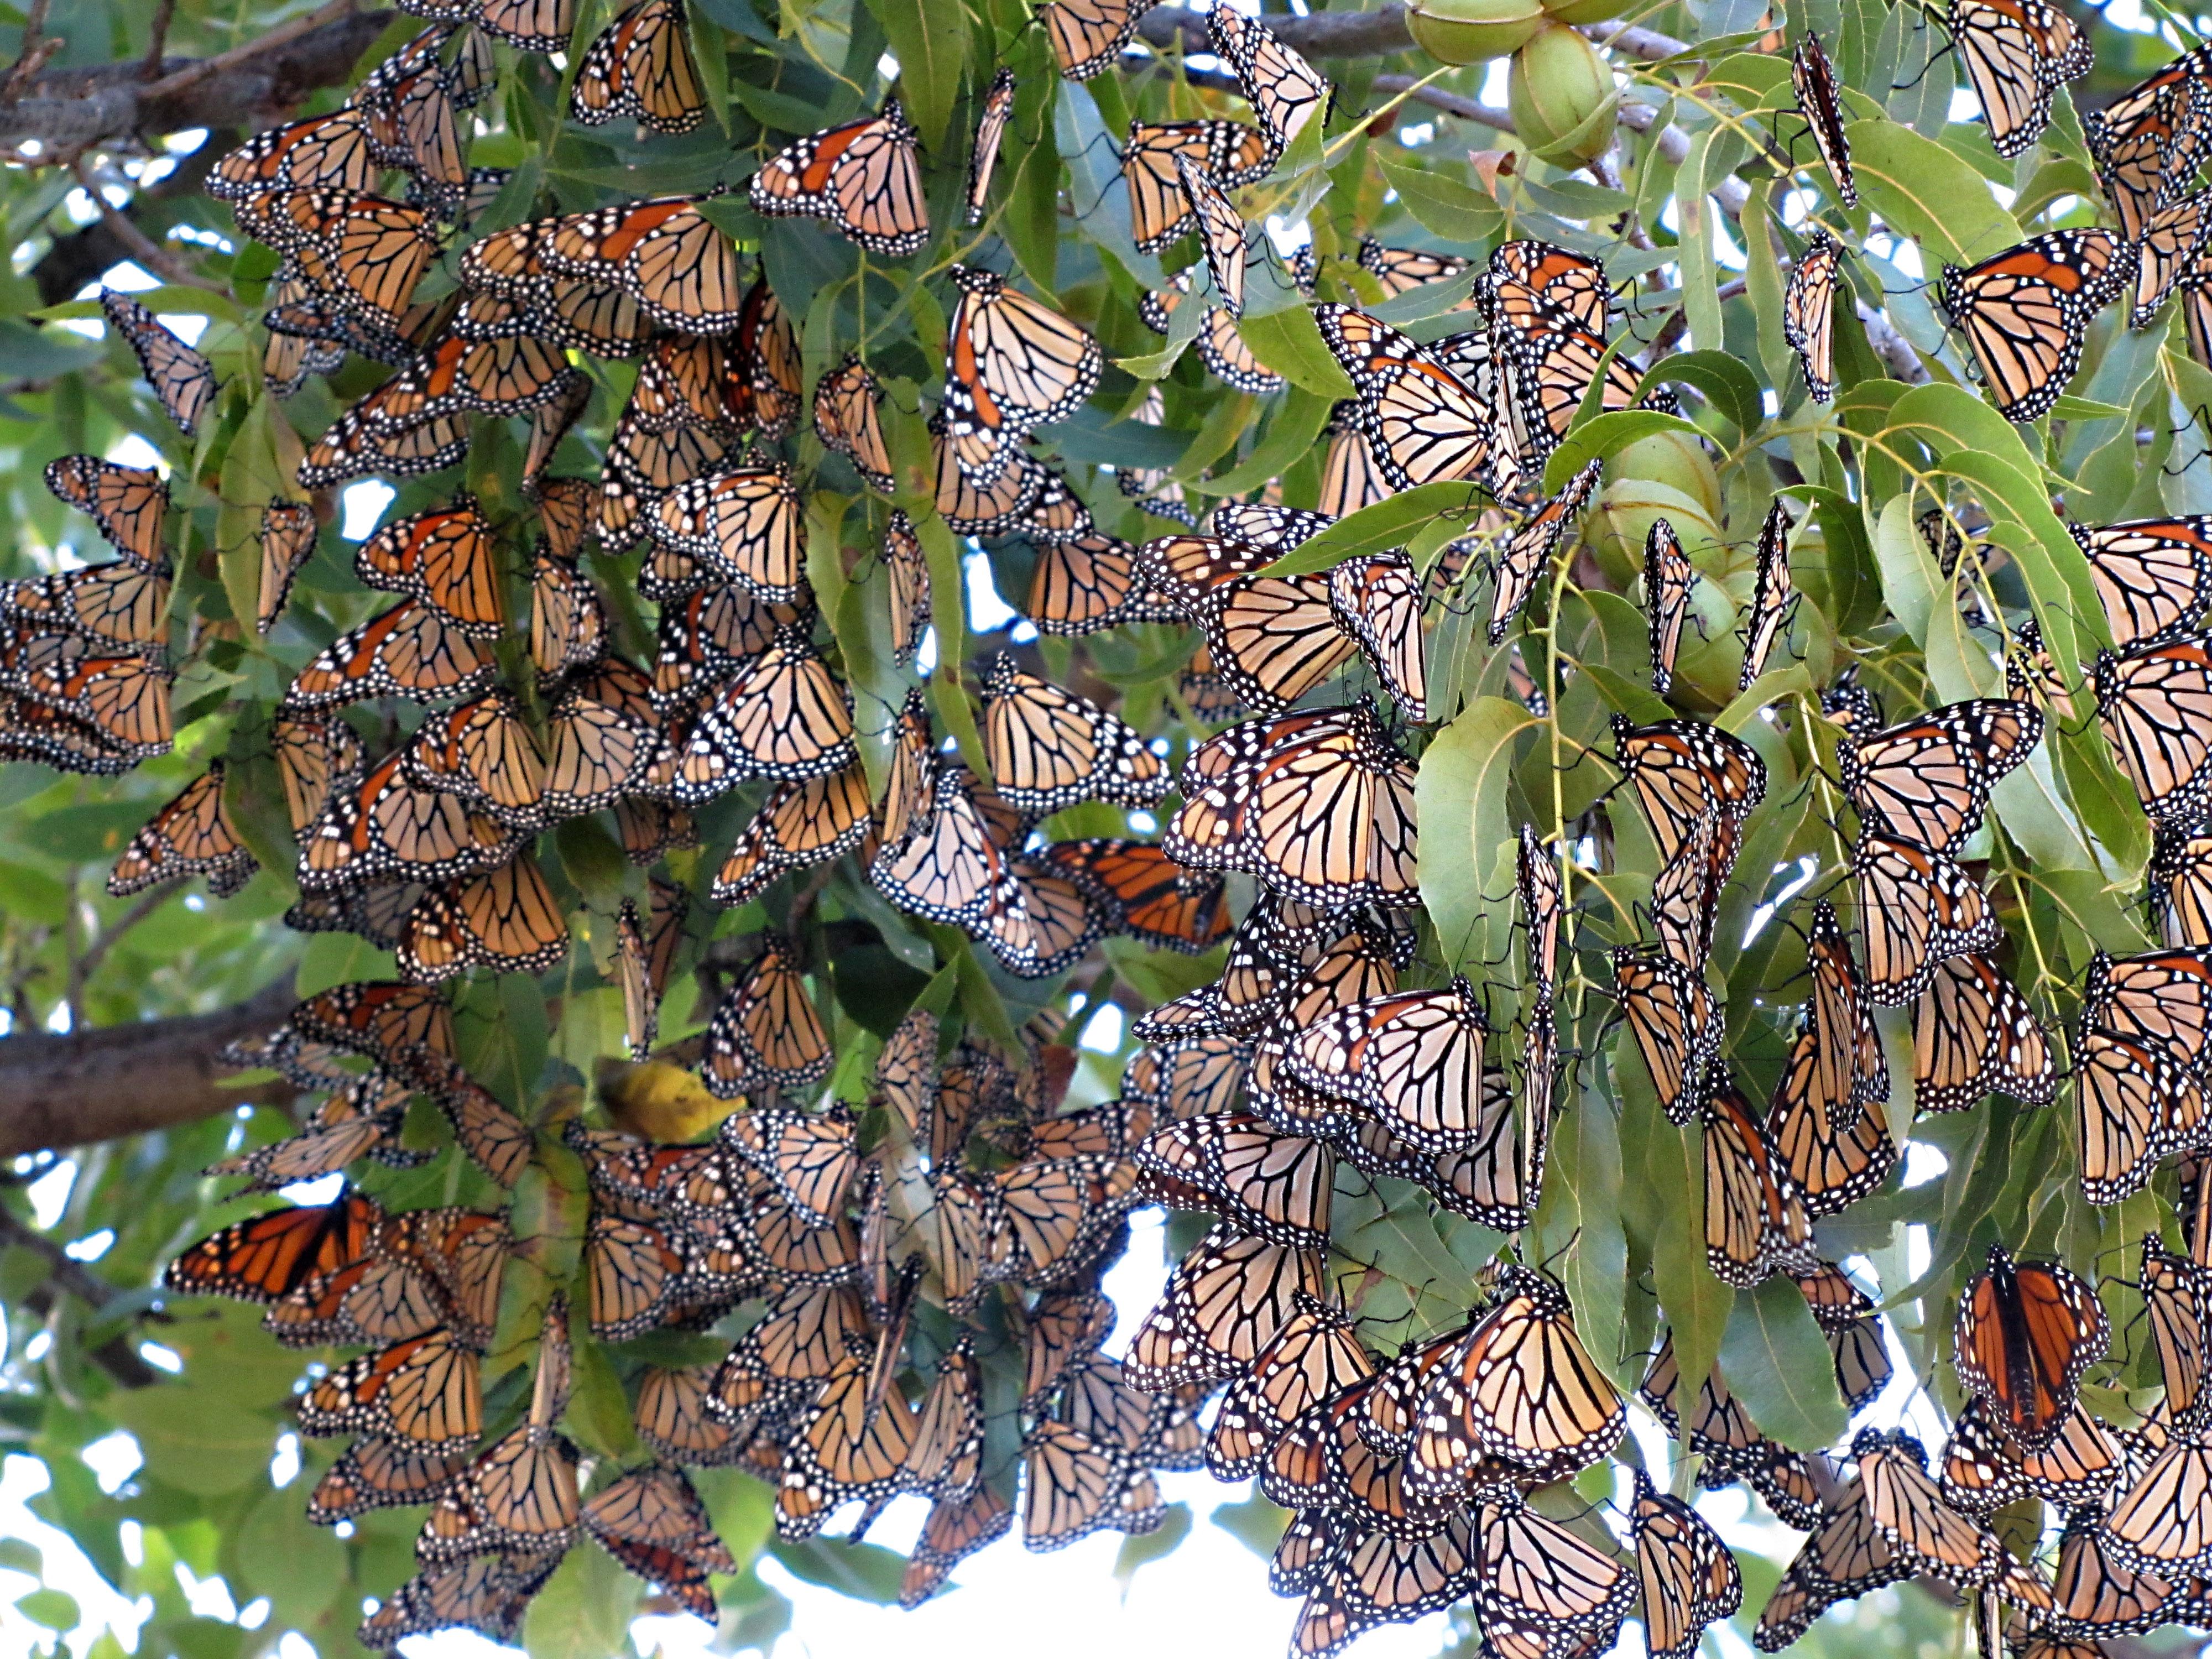 Image of Monarch Butterflies Resting at Overnight Roost During Fall Migration